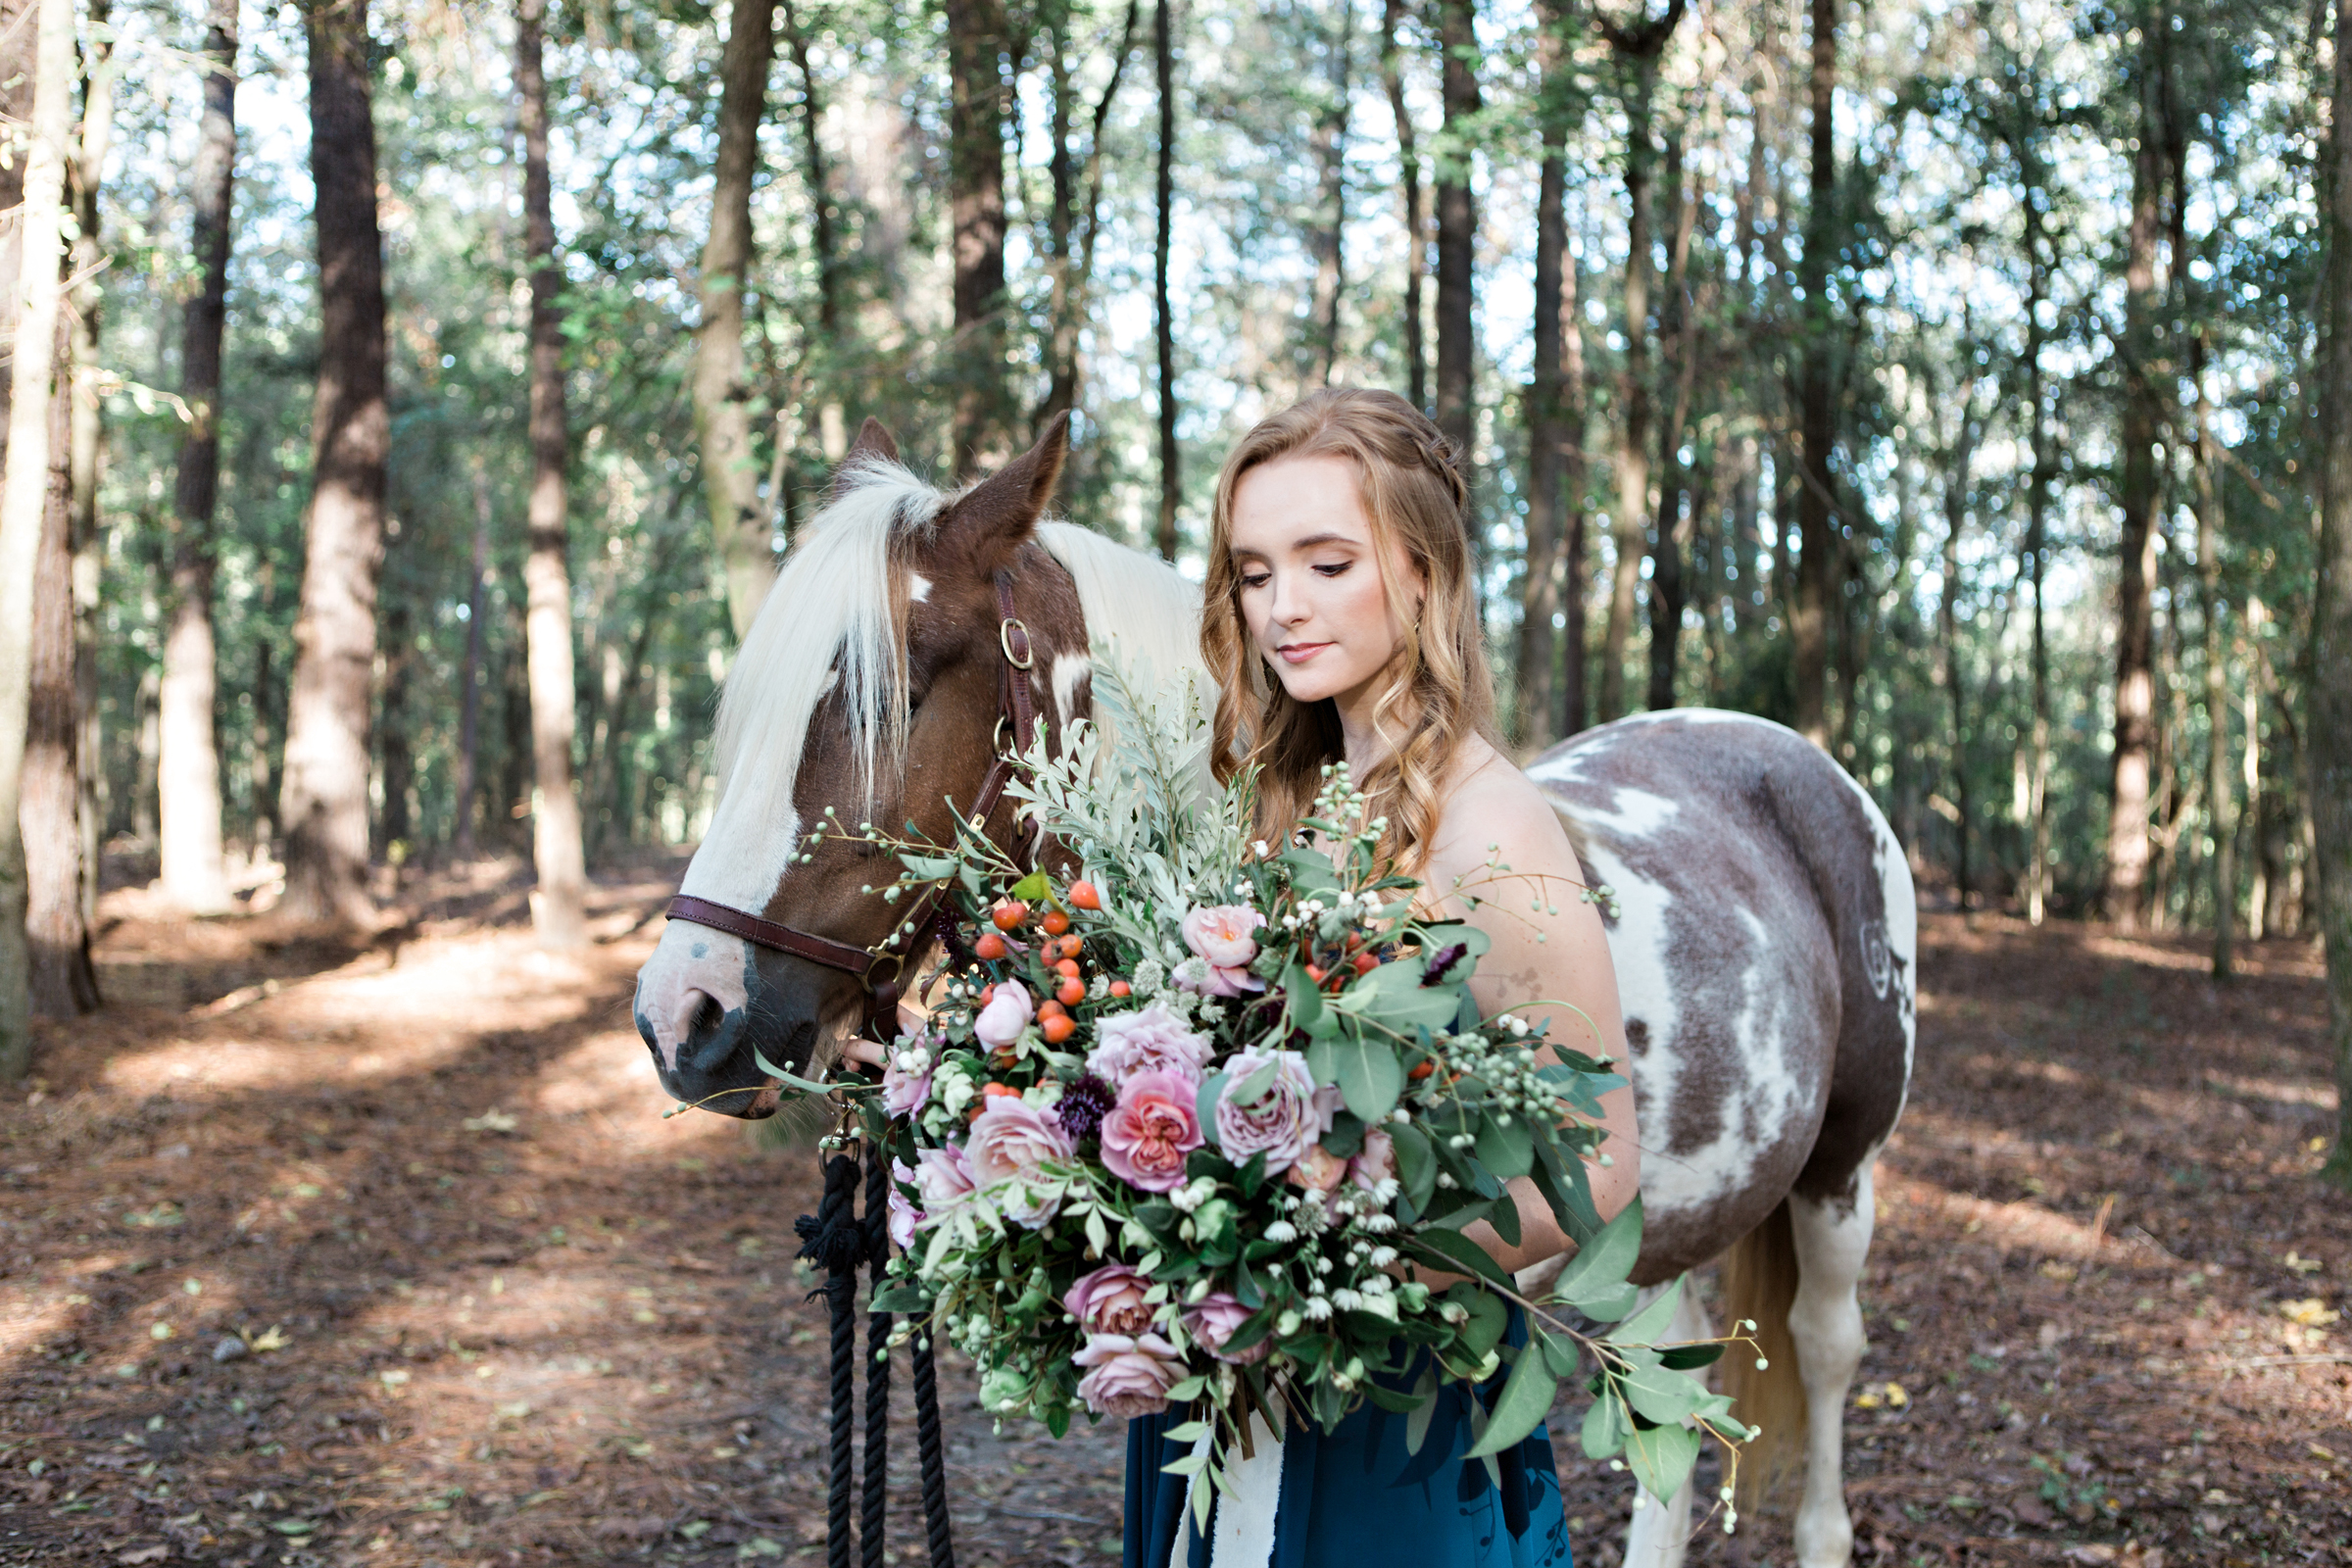 Matty Drollette-Photography-Editorial-Styled Photoshoot-Montgomery-Alabama-Southern Posies-109.jpg